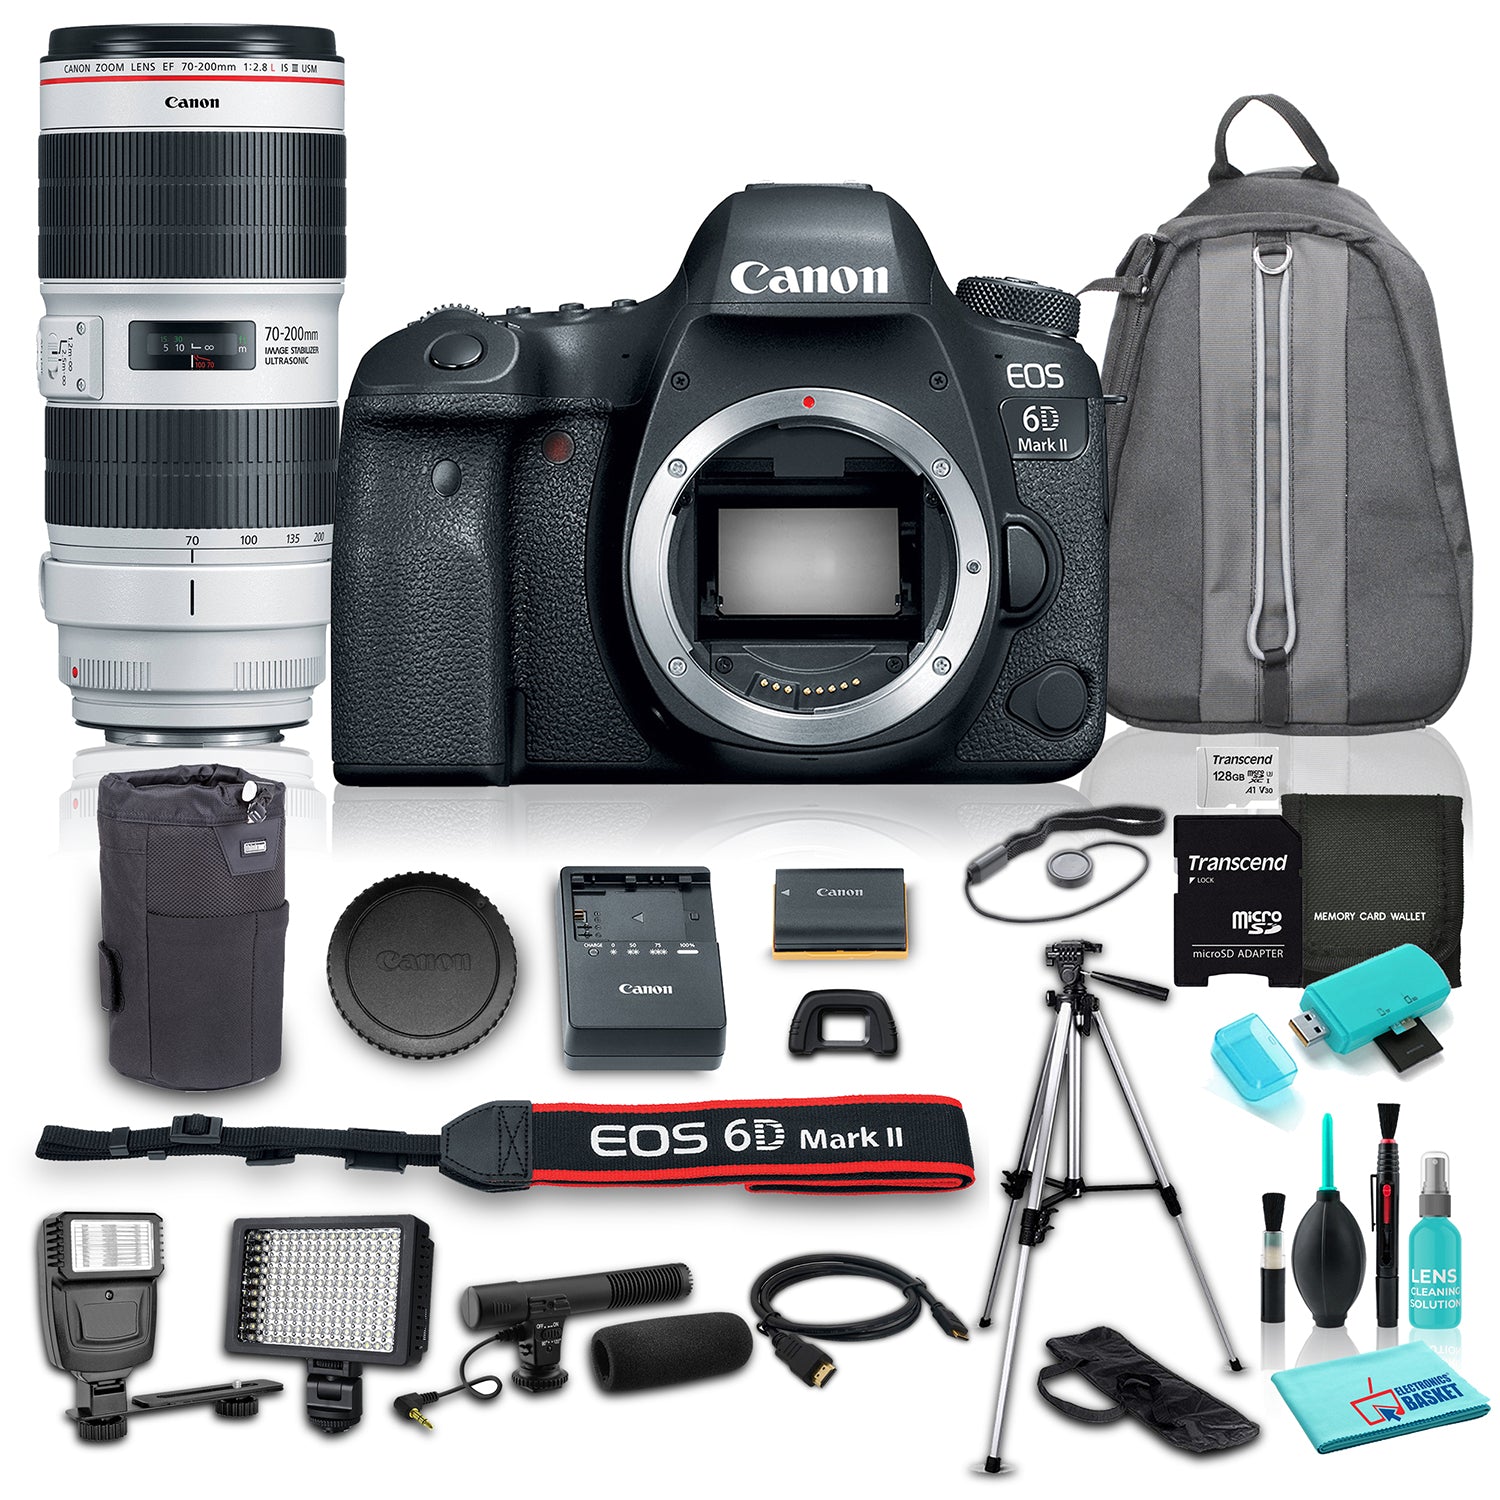 Canon EOS 6D Mark II DSLR Camera (Body Only) w/ Canon EF 70-200mm f/2.8L IS III USM Lens Bundle w/ 12 Piece Accessories